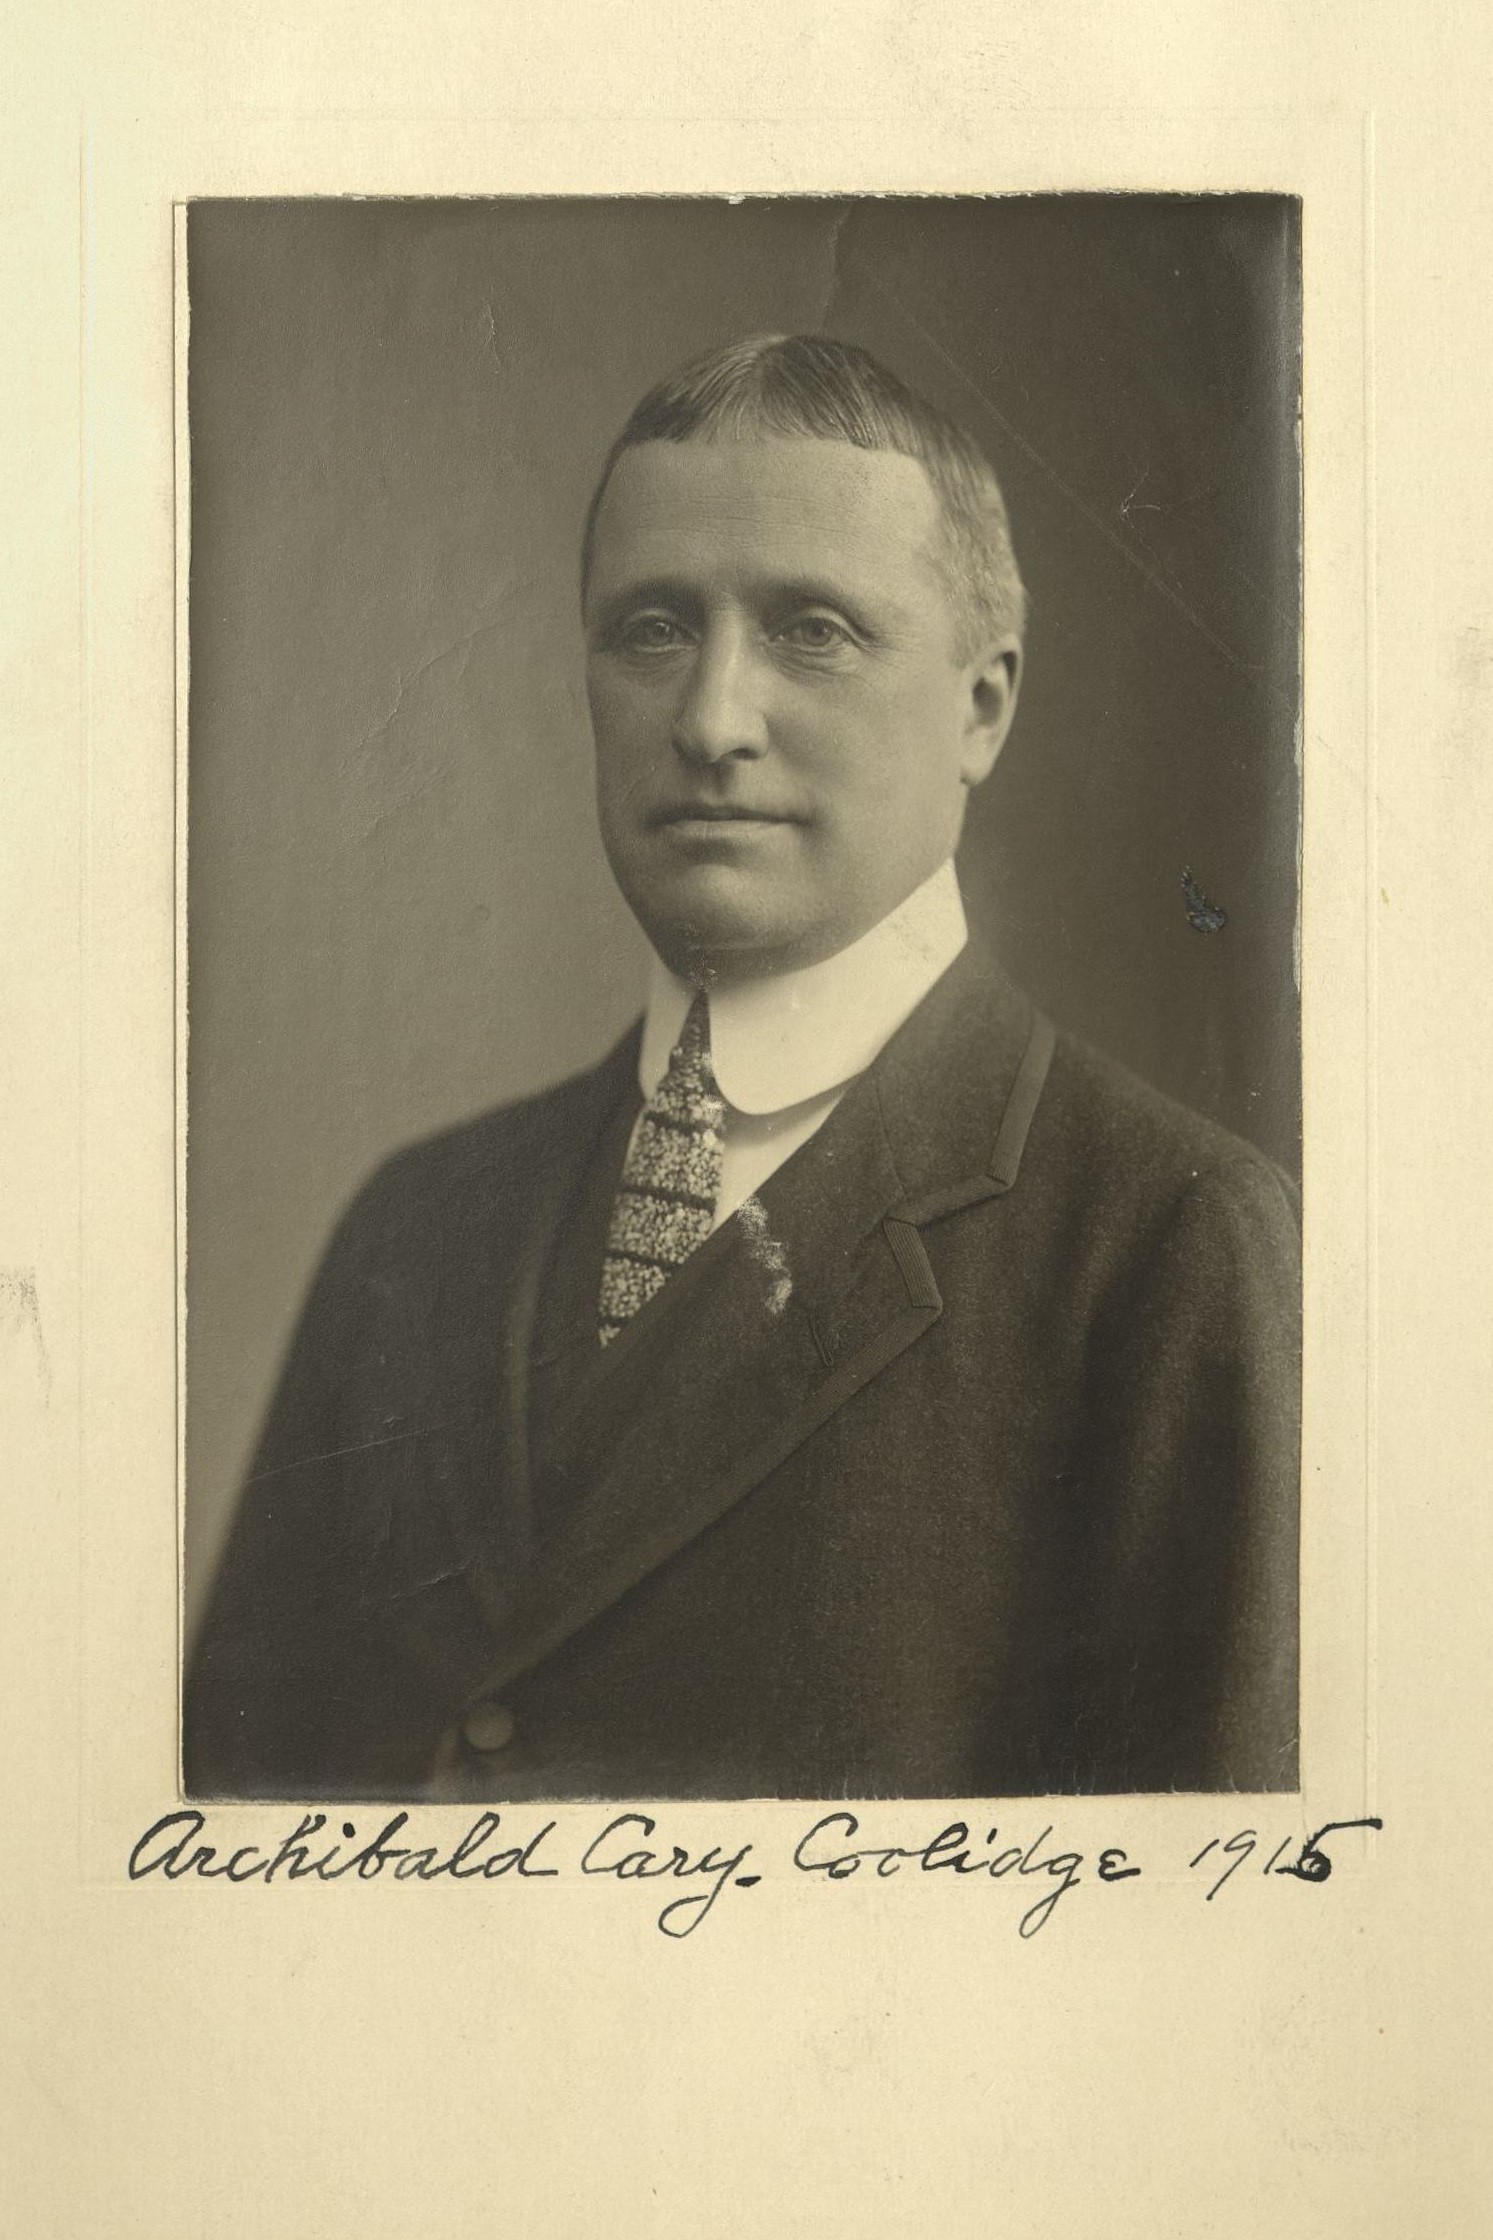 Member portrait of Archibald Cary Coolidge